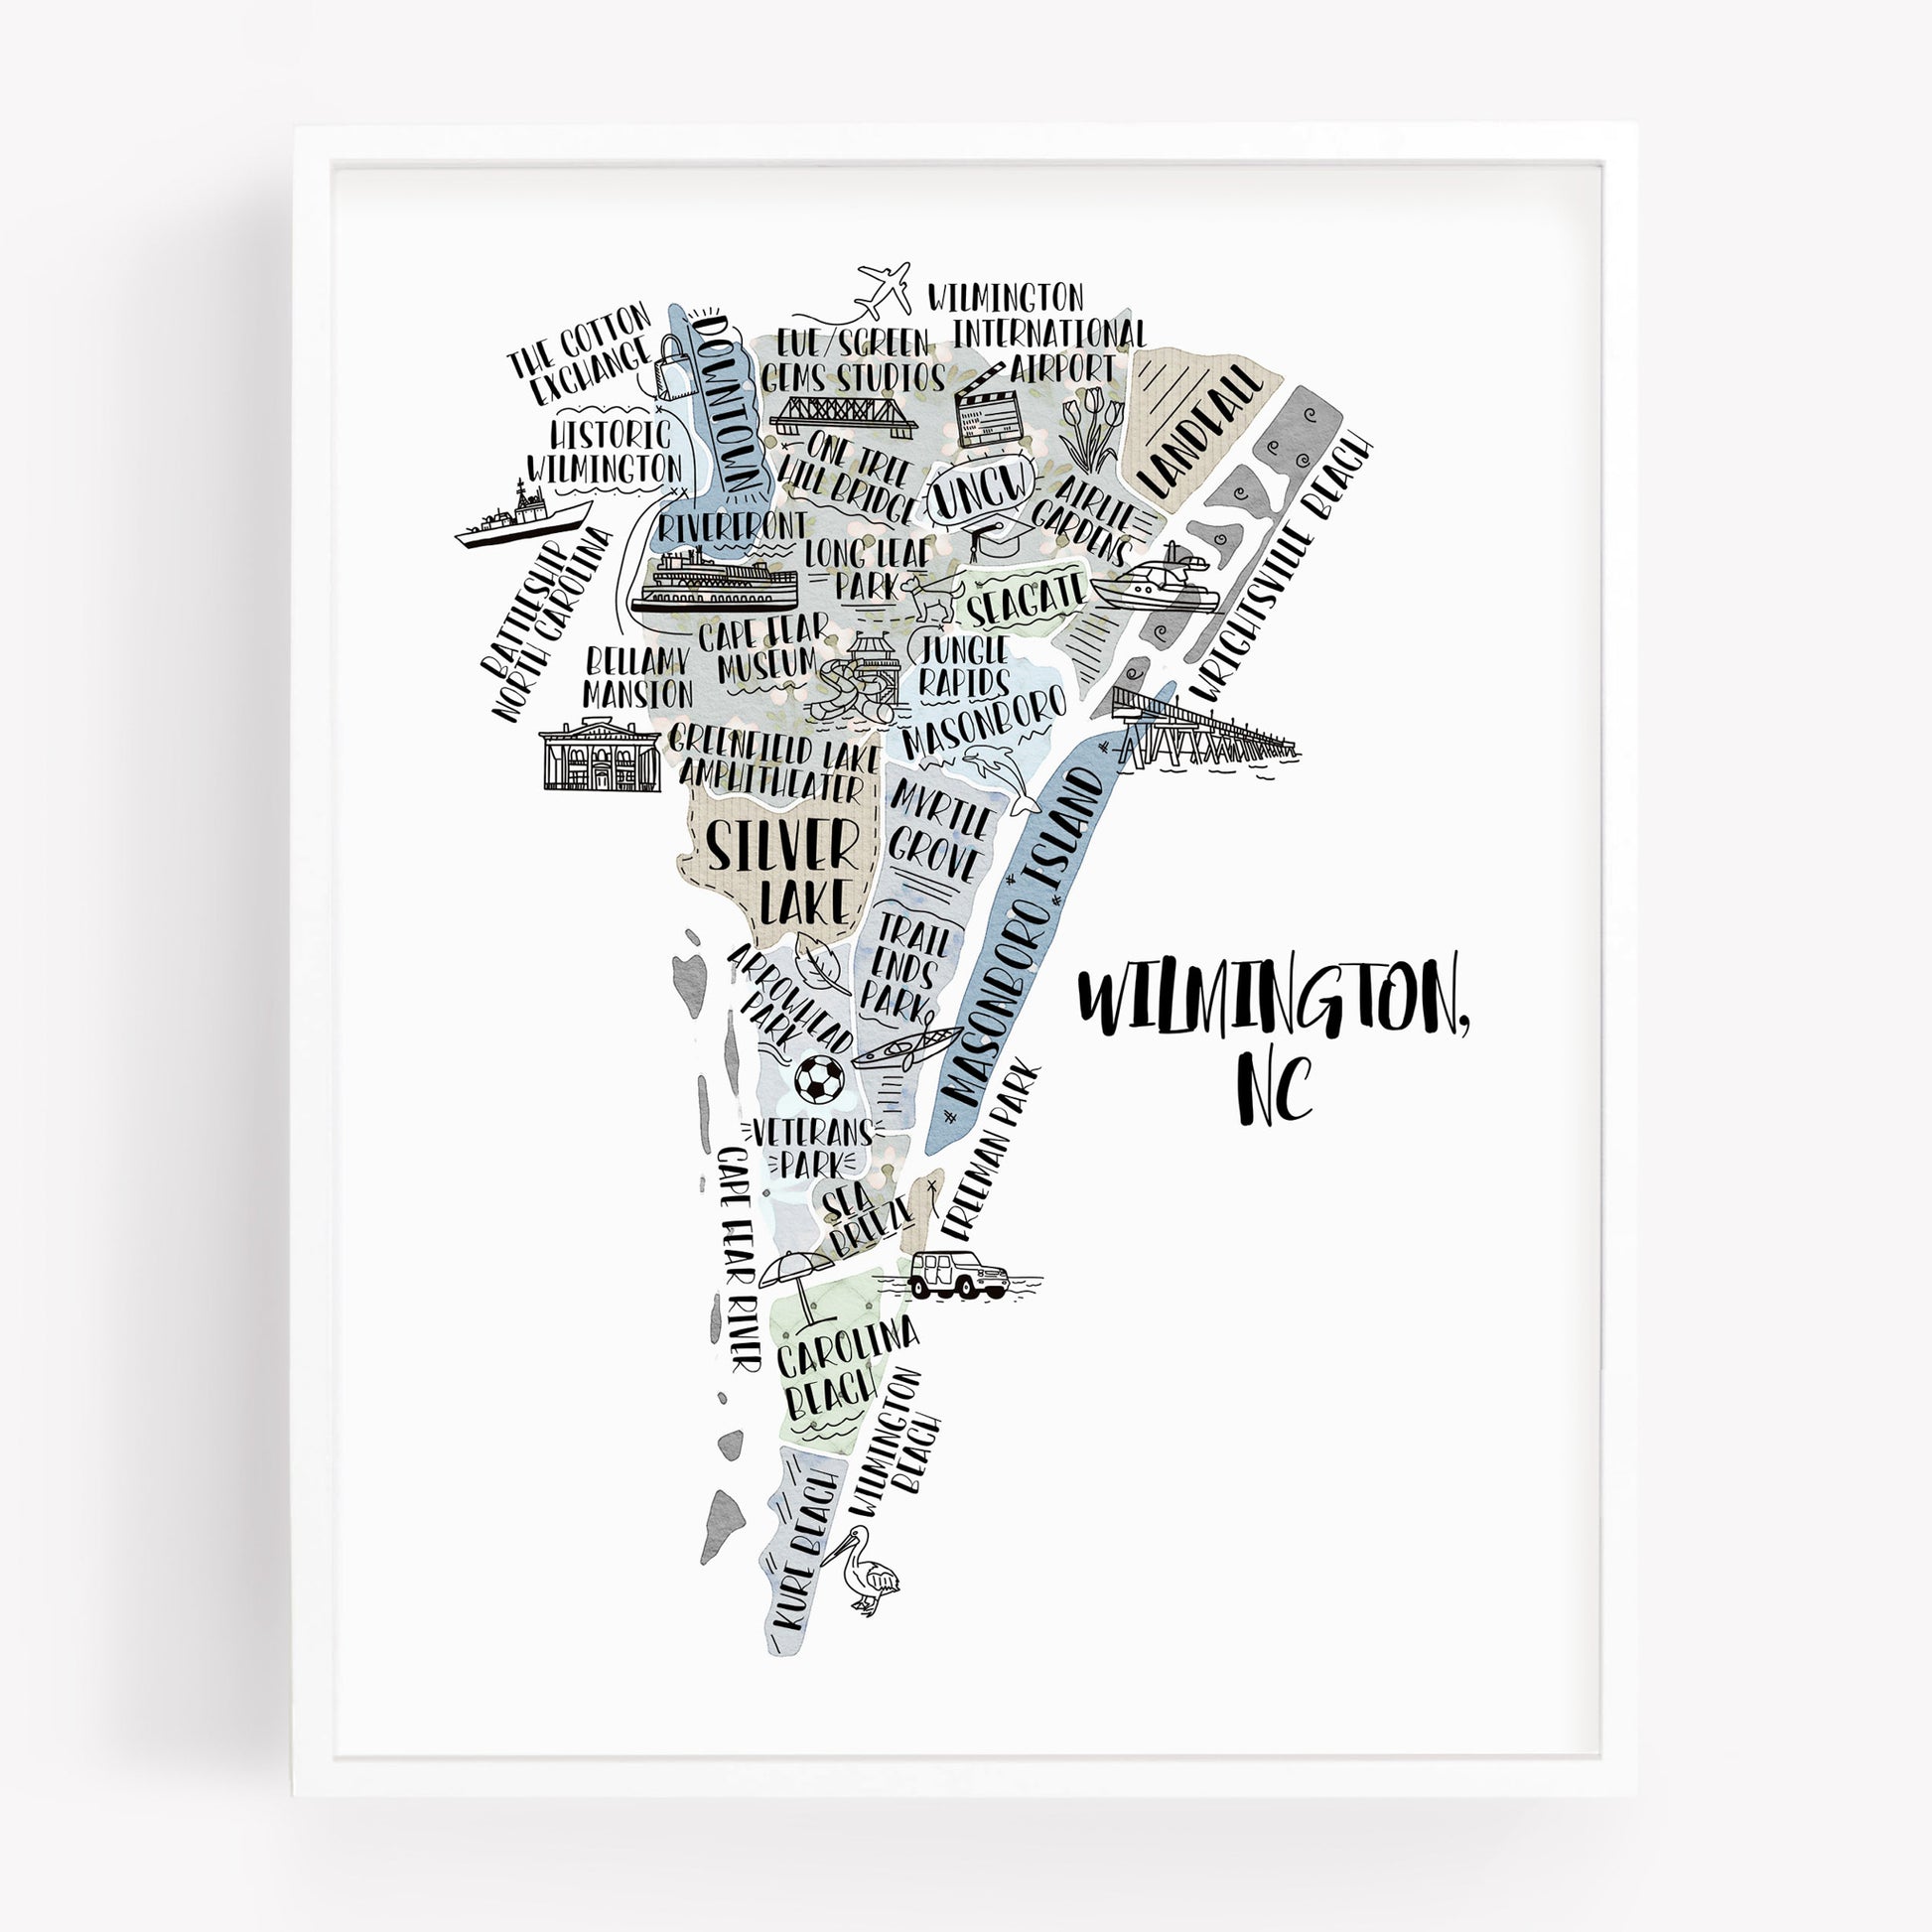 An illustrated map of Wilmington North Carolina, as a print, in the color gray